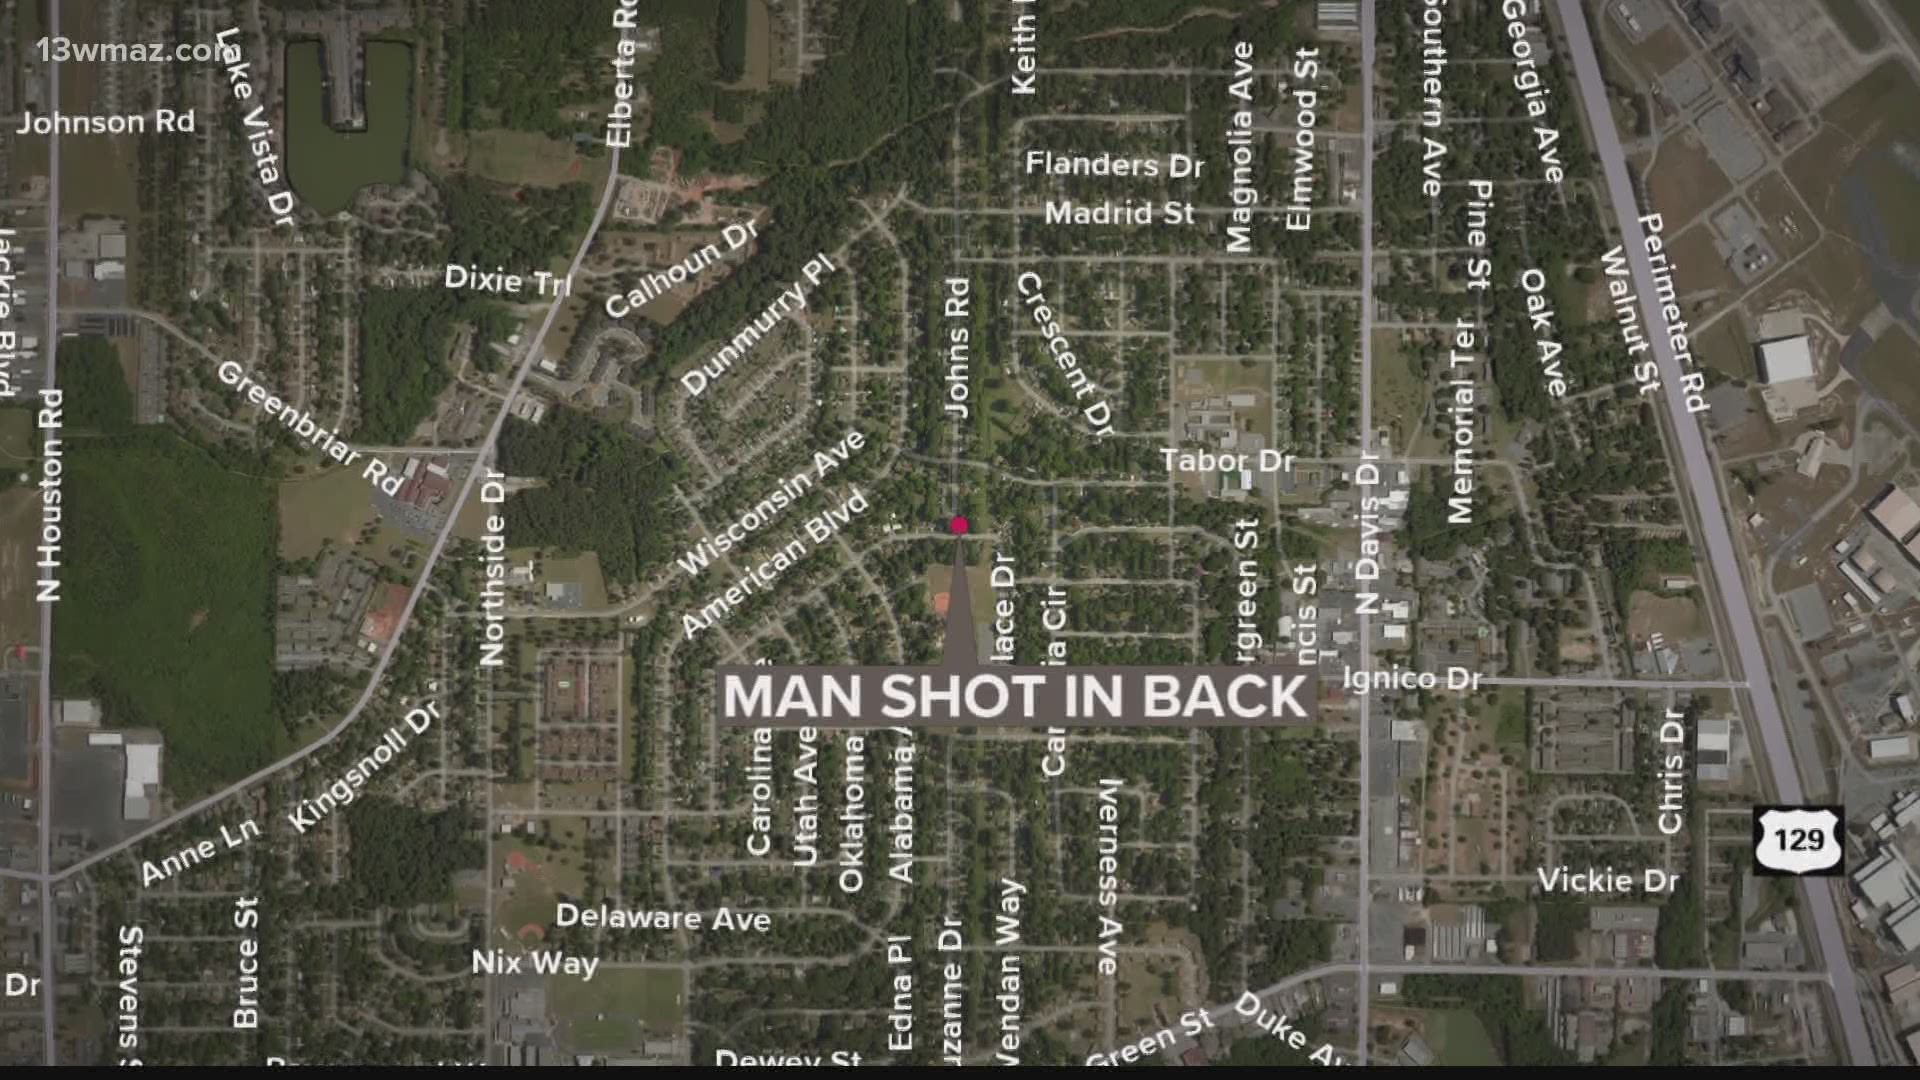 The Warner Robins Police Department is investigating after a man was shot in the back Tuesday night.